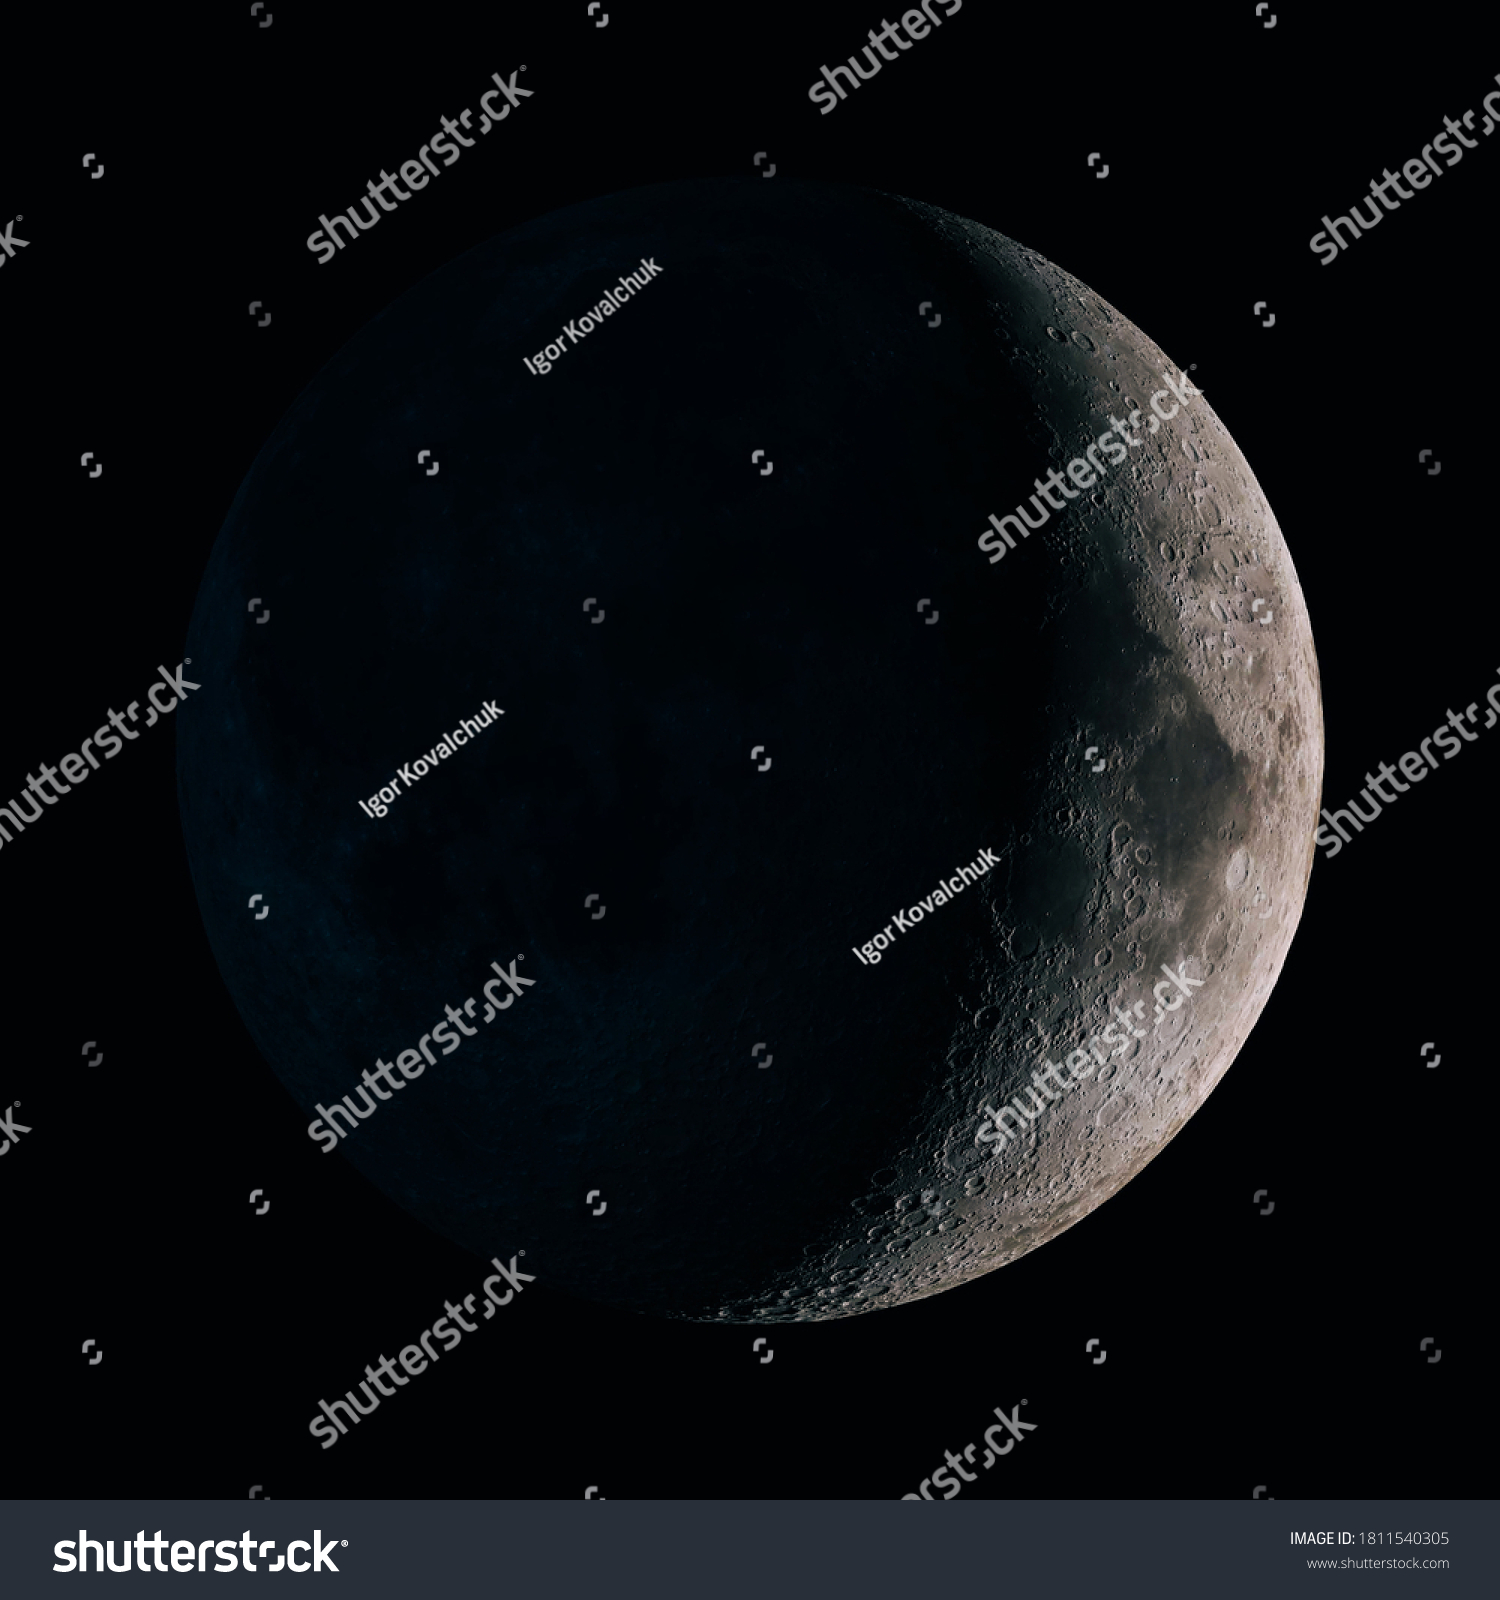 Half moon background. The Moon is an astronomical body that orbits planet Earth, permanent natural satellite. Elements of this image furnished by NASA #1811540305